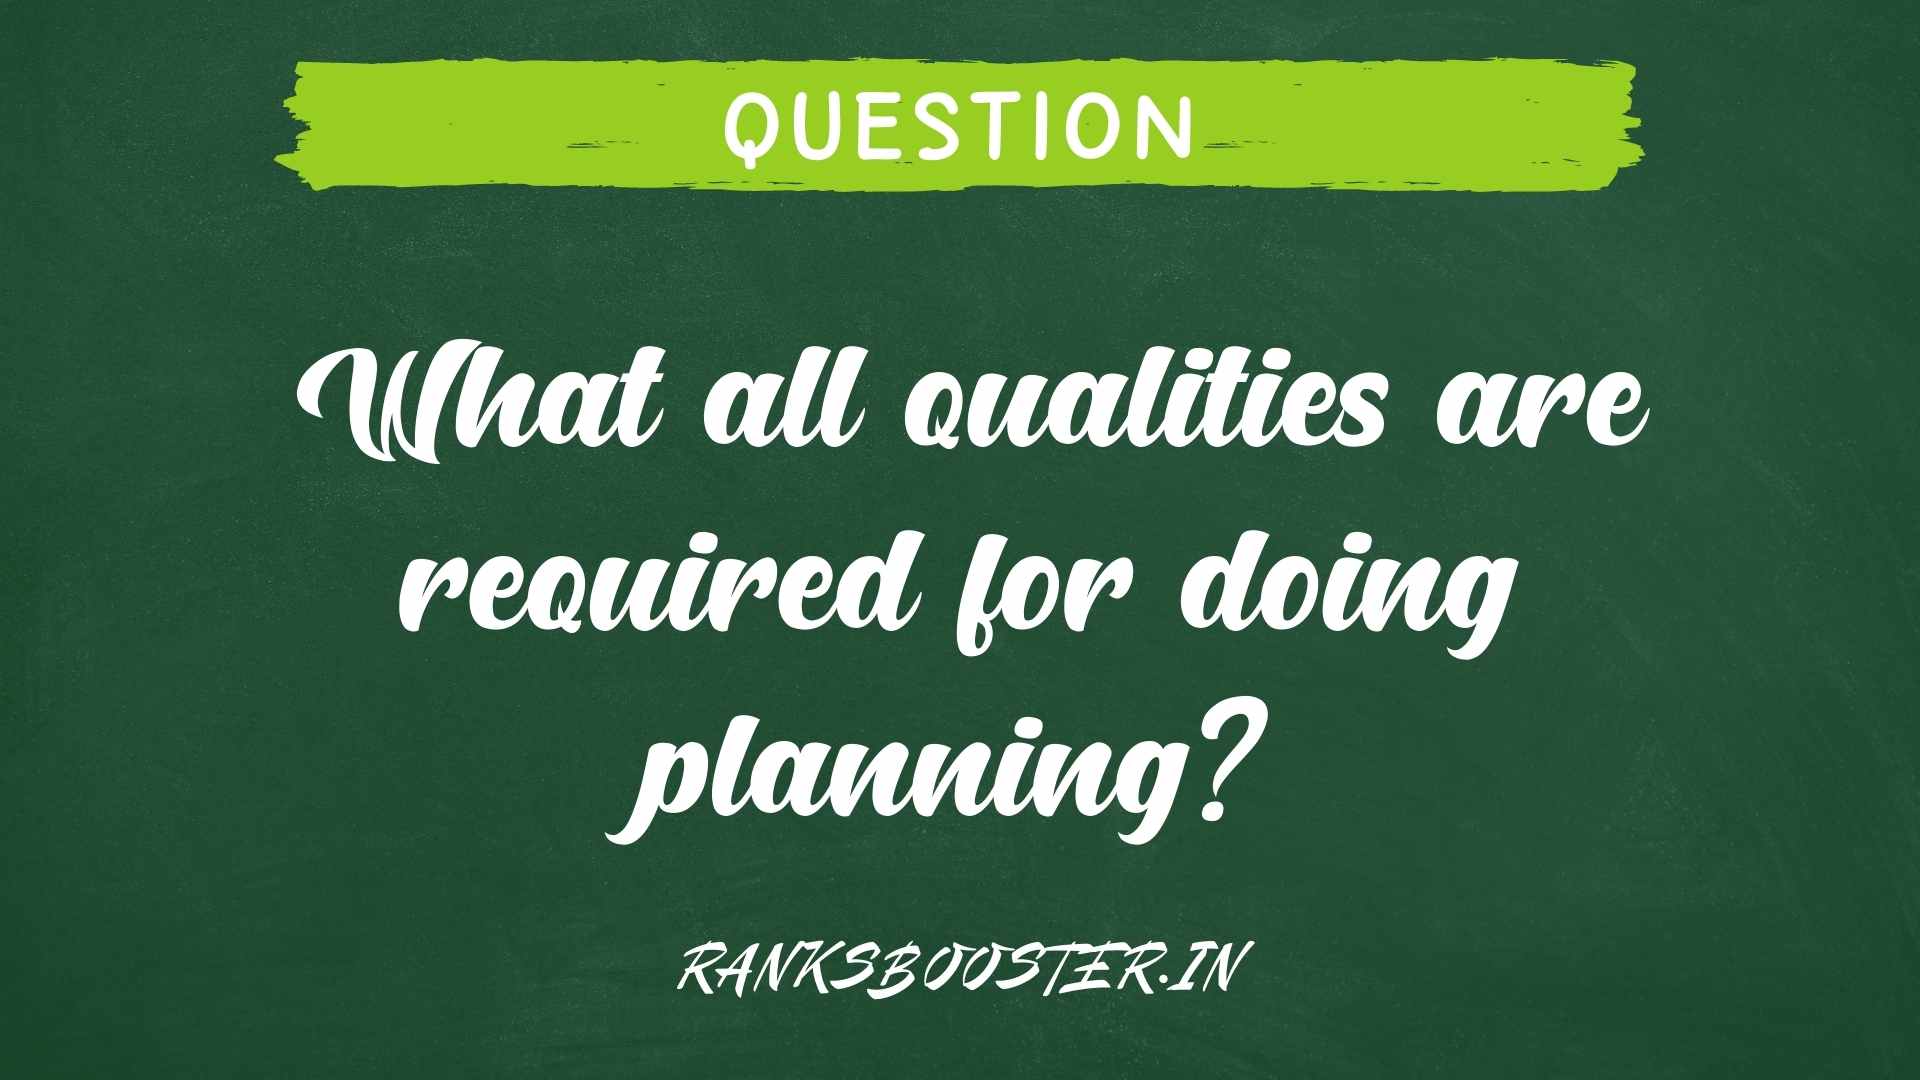 What all qualities are required for doing planning?